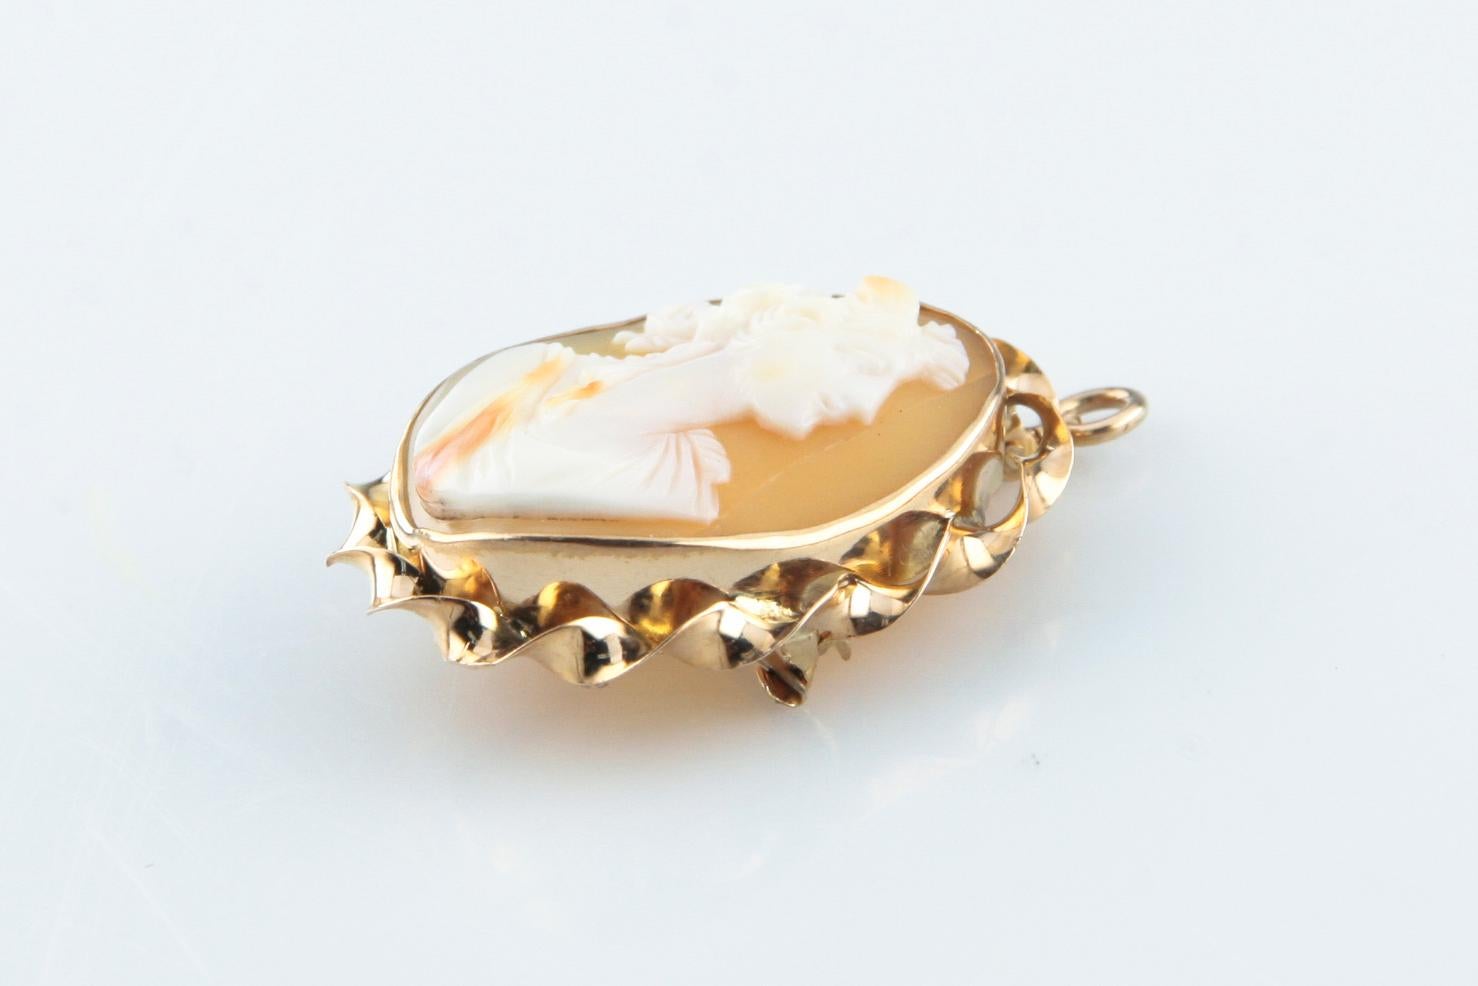 Bright Finish
Features a Carved Shell Cameo, Depicting the Dextral Formal Profile of a Woman
Measures 25 x 20 mm, 3.85 grams
Bezel Set Within a 10kt Yellow Gold Frame
Pin Shaft Holder and a Retracting Bail are On the Reverse Side of the Pendant